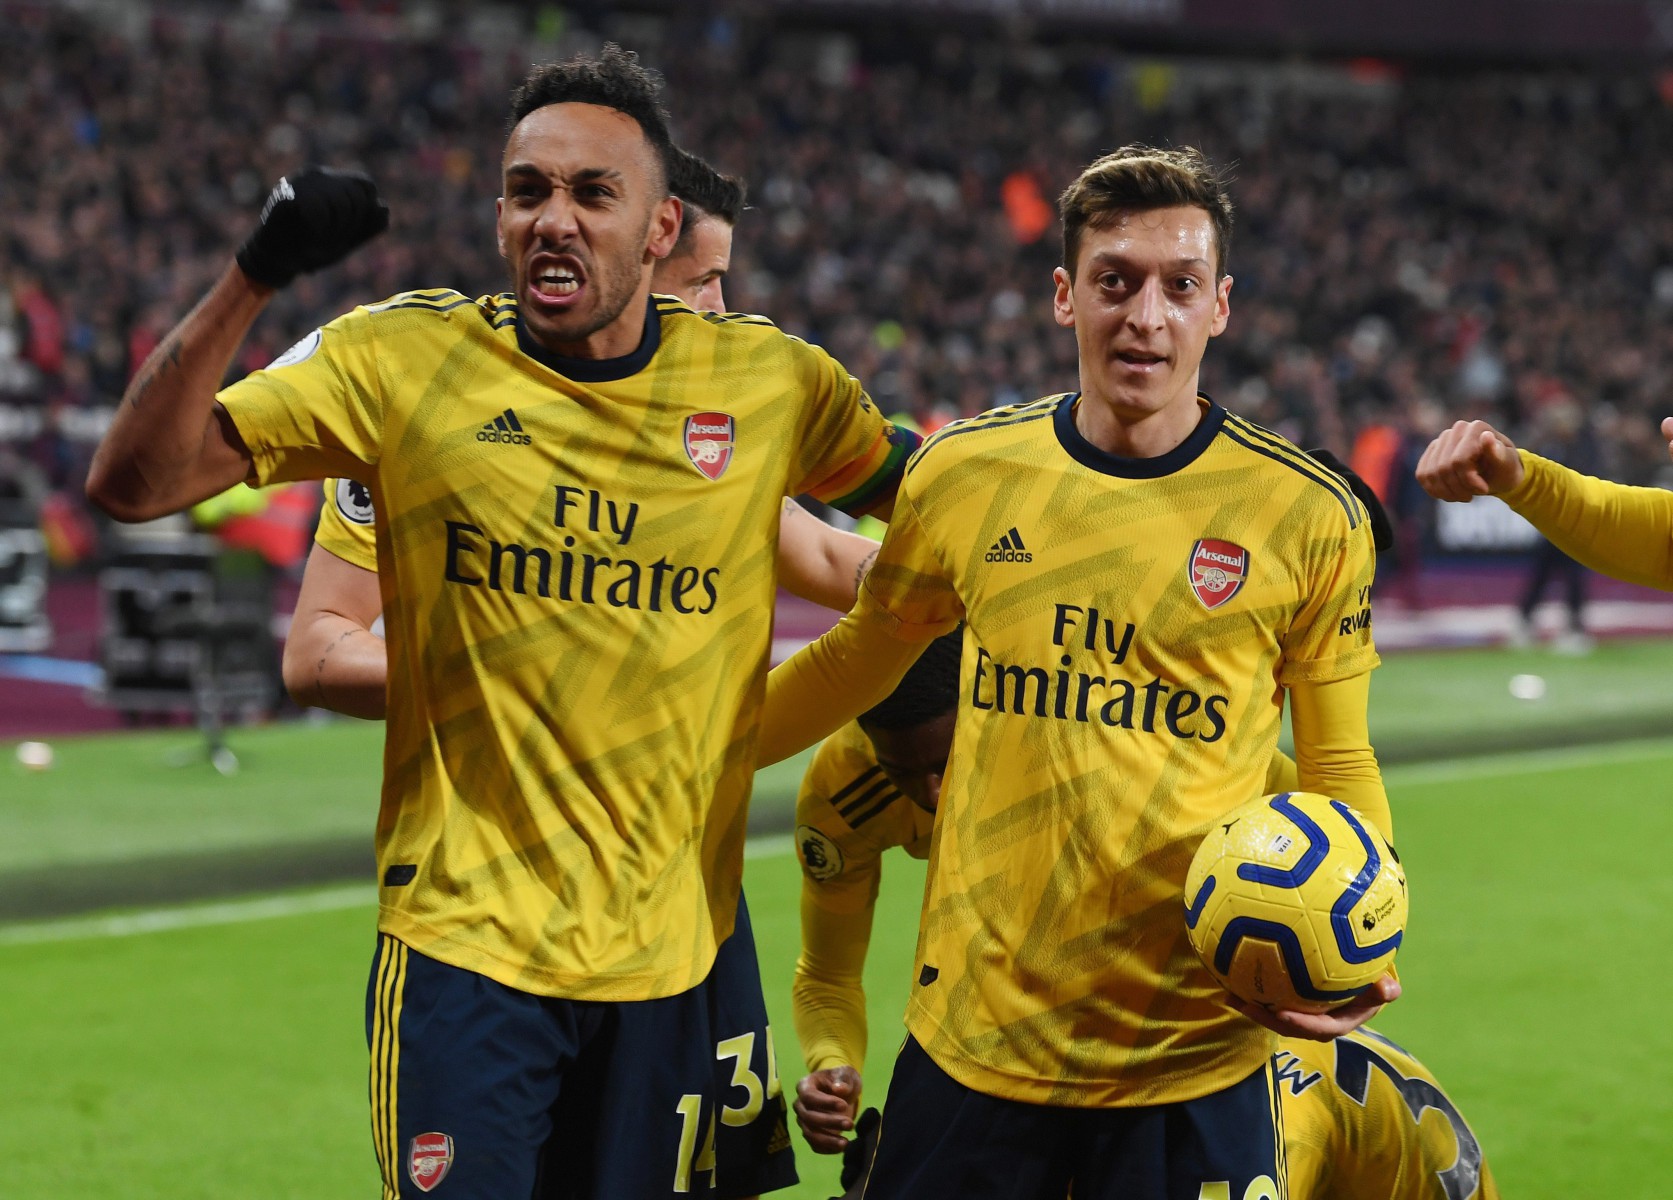 , Arsenal fans joke Ozil is riding invisible horse in hilarious skipping celebration as West Ham win has him smiling again